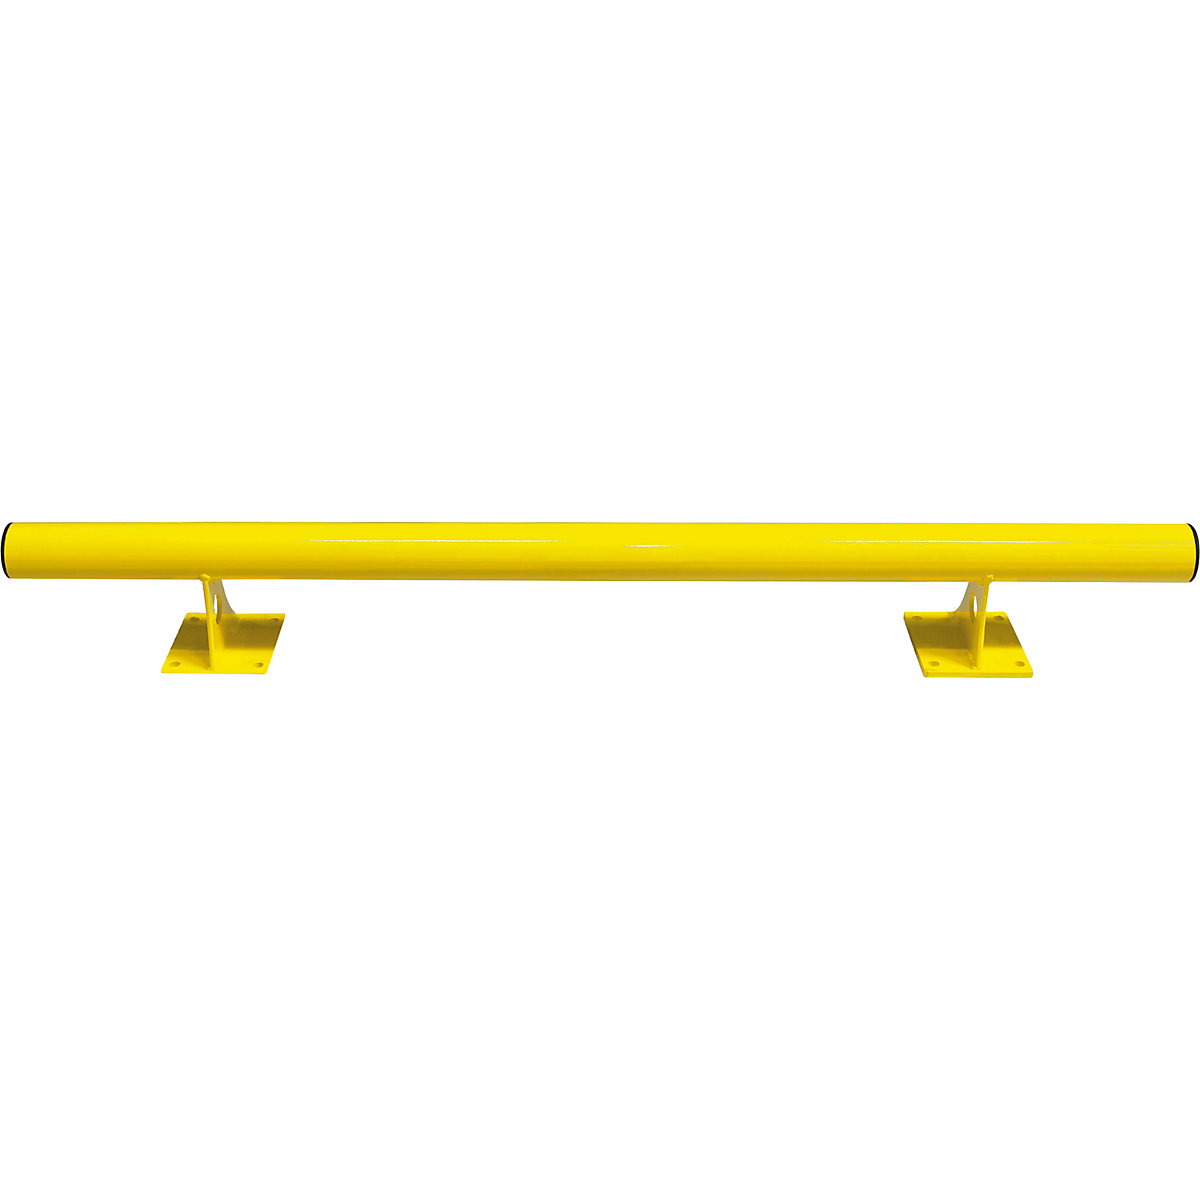 Impact protection barrier, to bolt in place, length 1500 mm-2